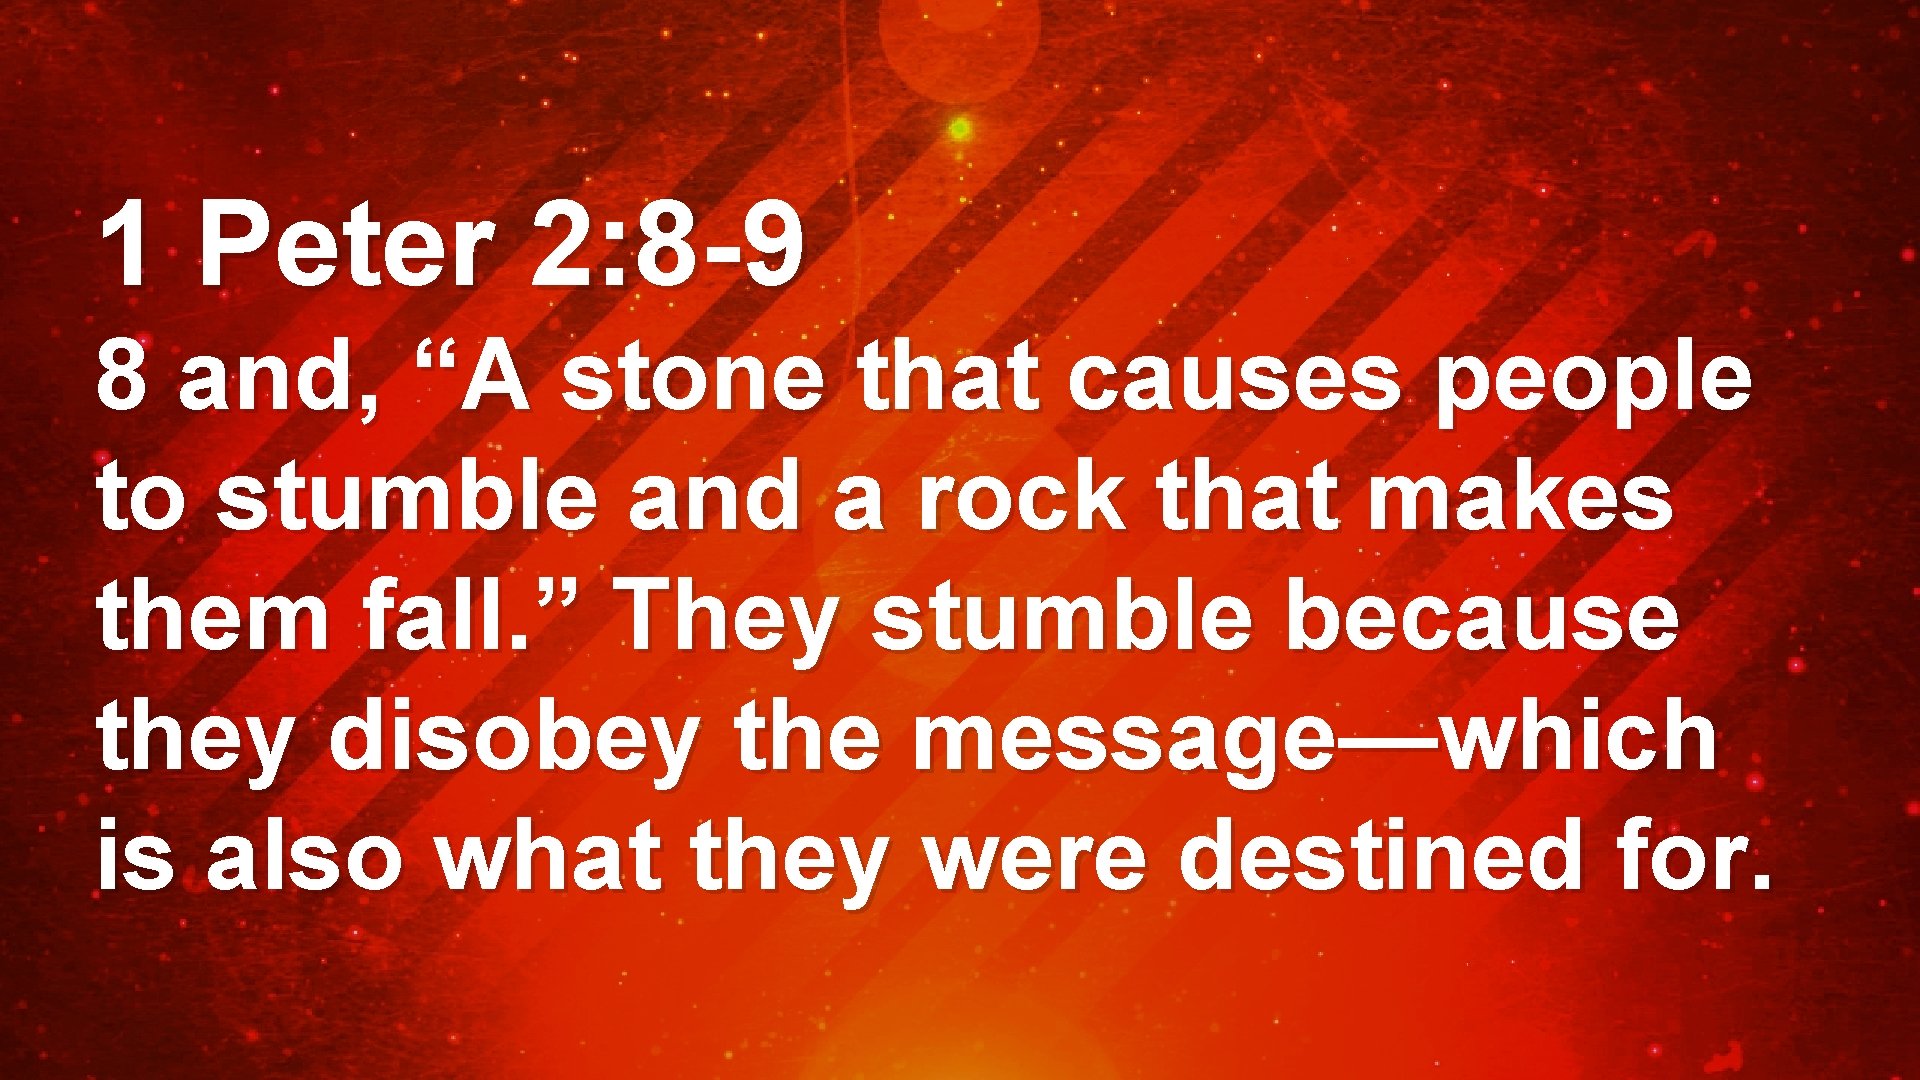 1 Peter 2: 8 -9 8 and, “A stone that causes people to stumble